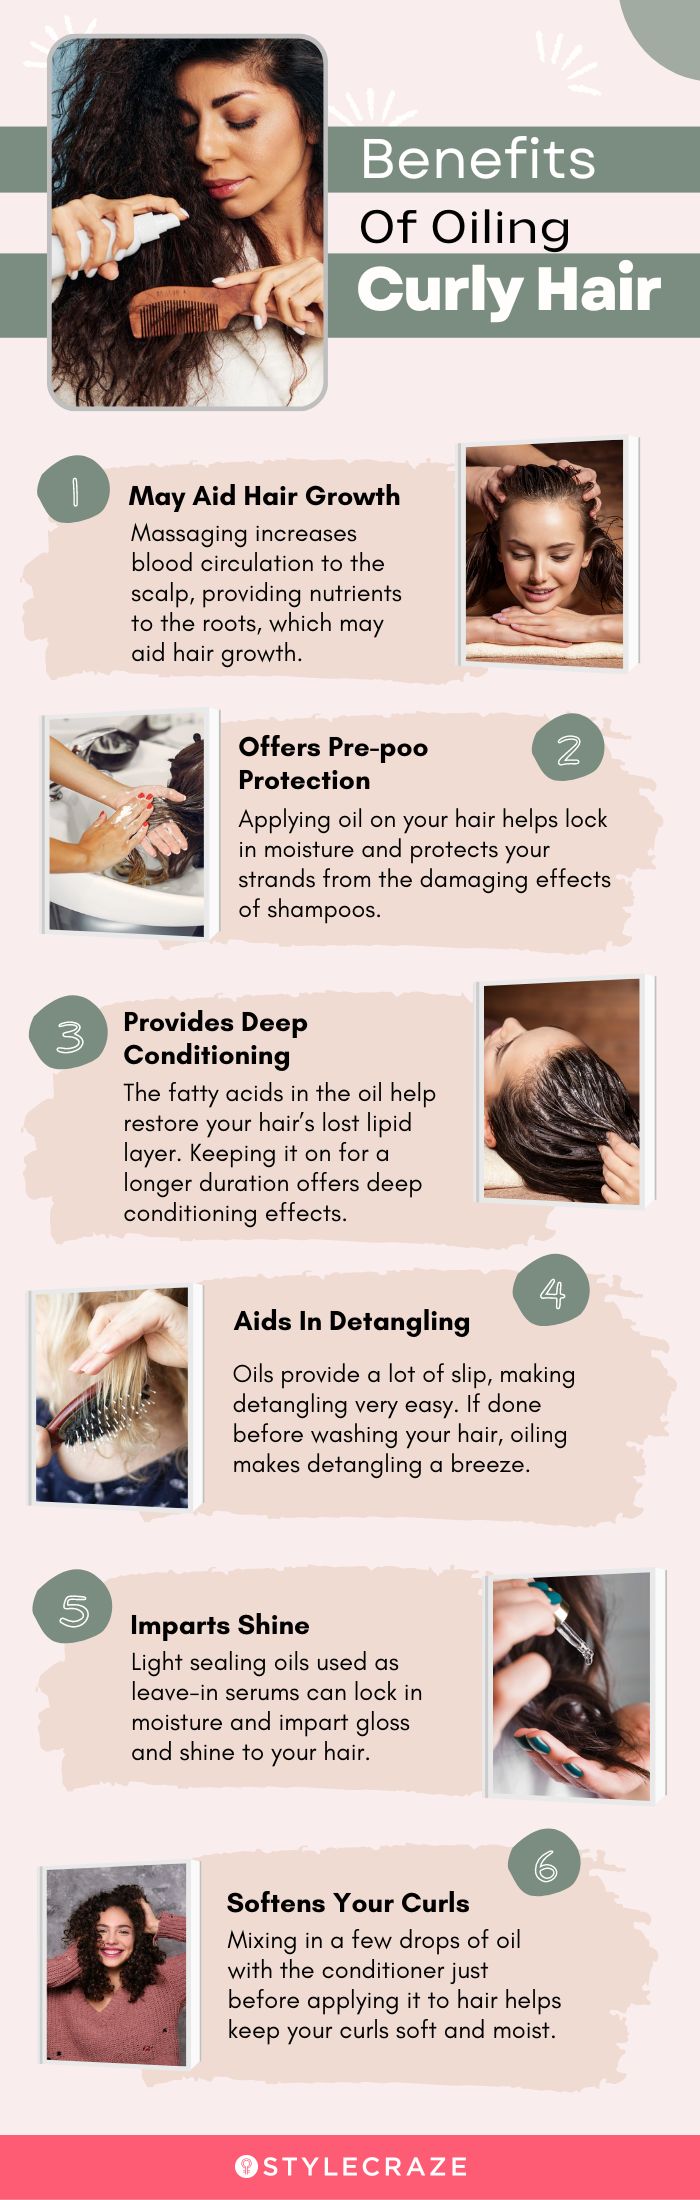 benefits of oiling curly hair [infographic]